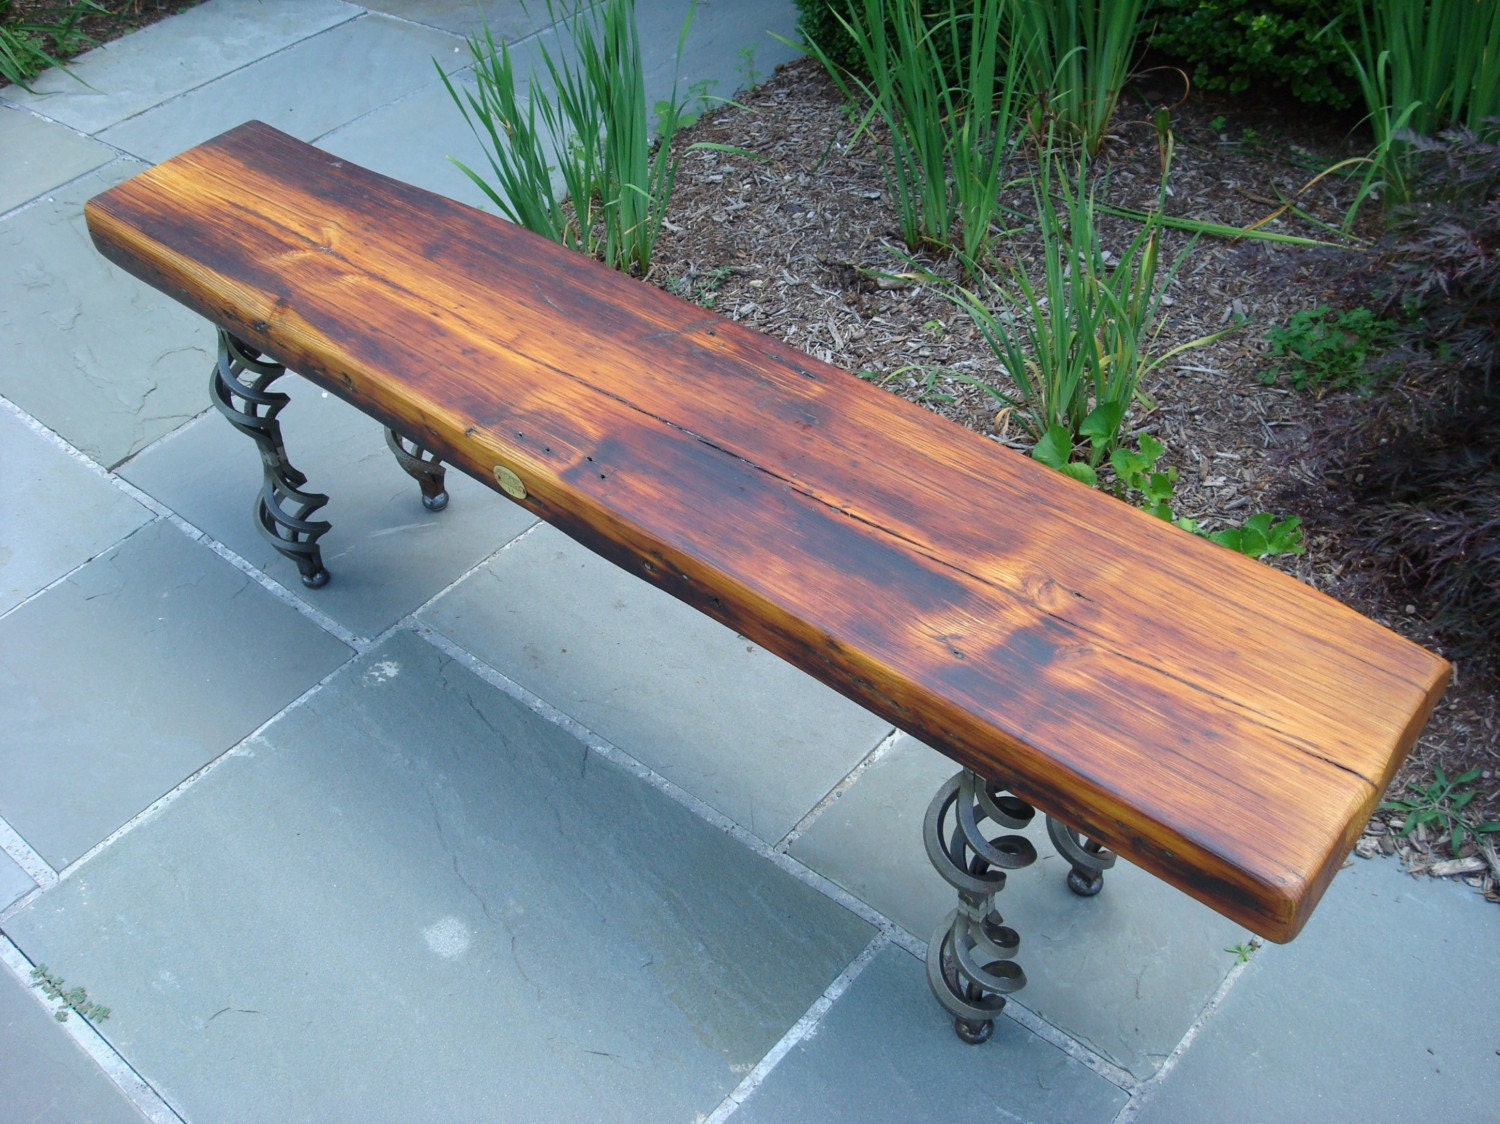 Reclaimed wood bench/coffee table with steel base by surthrival